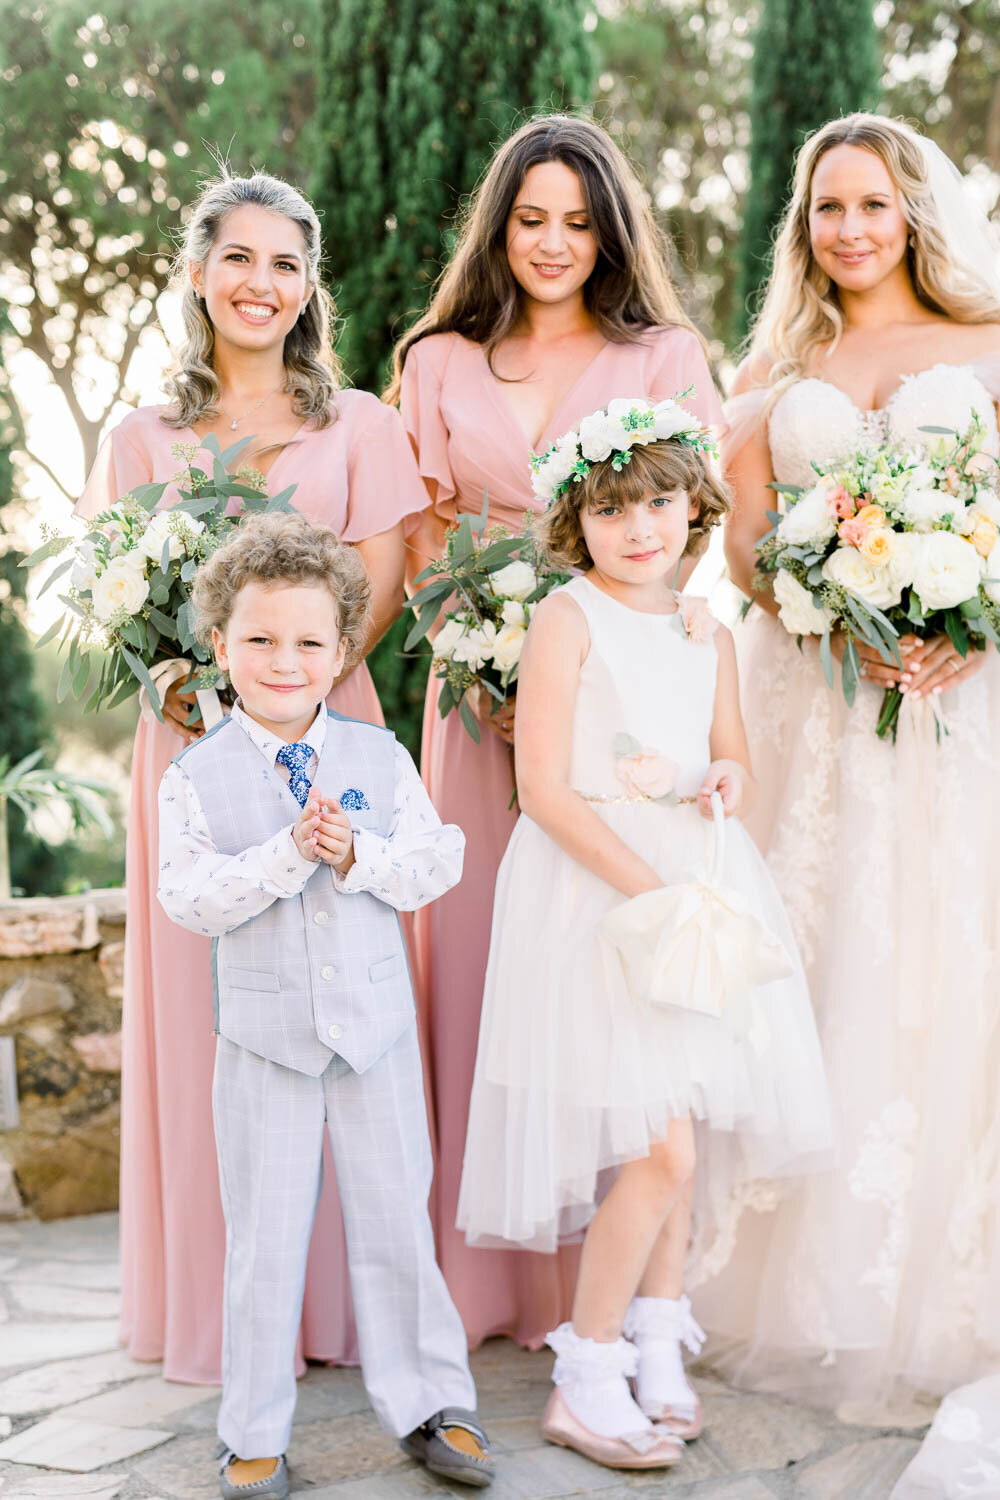 Bride with her bridesmaids and kids at her wedding.